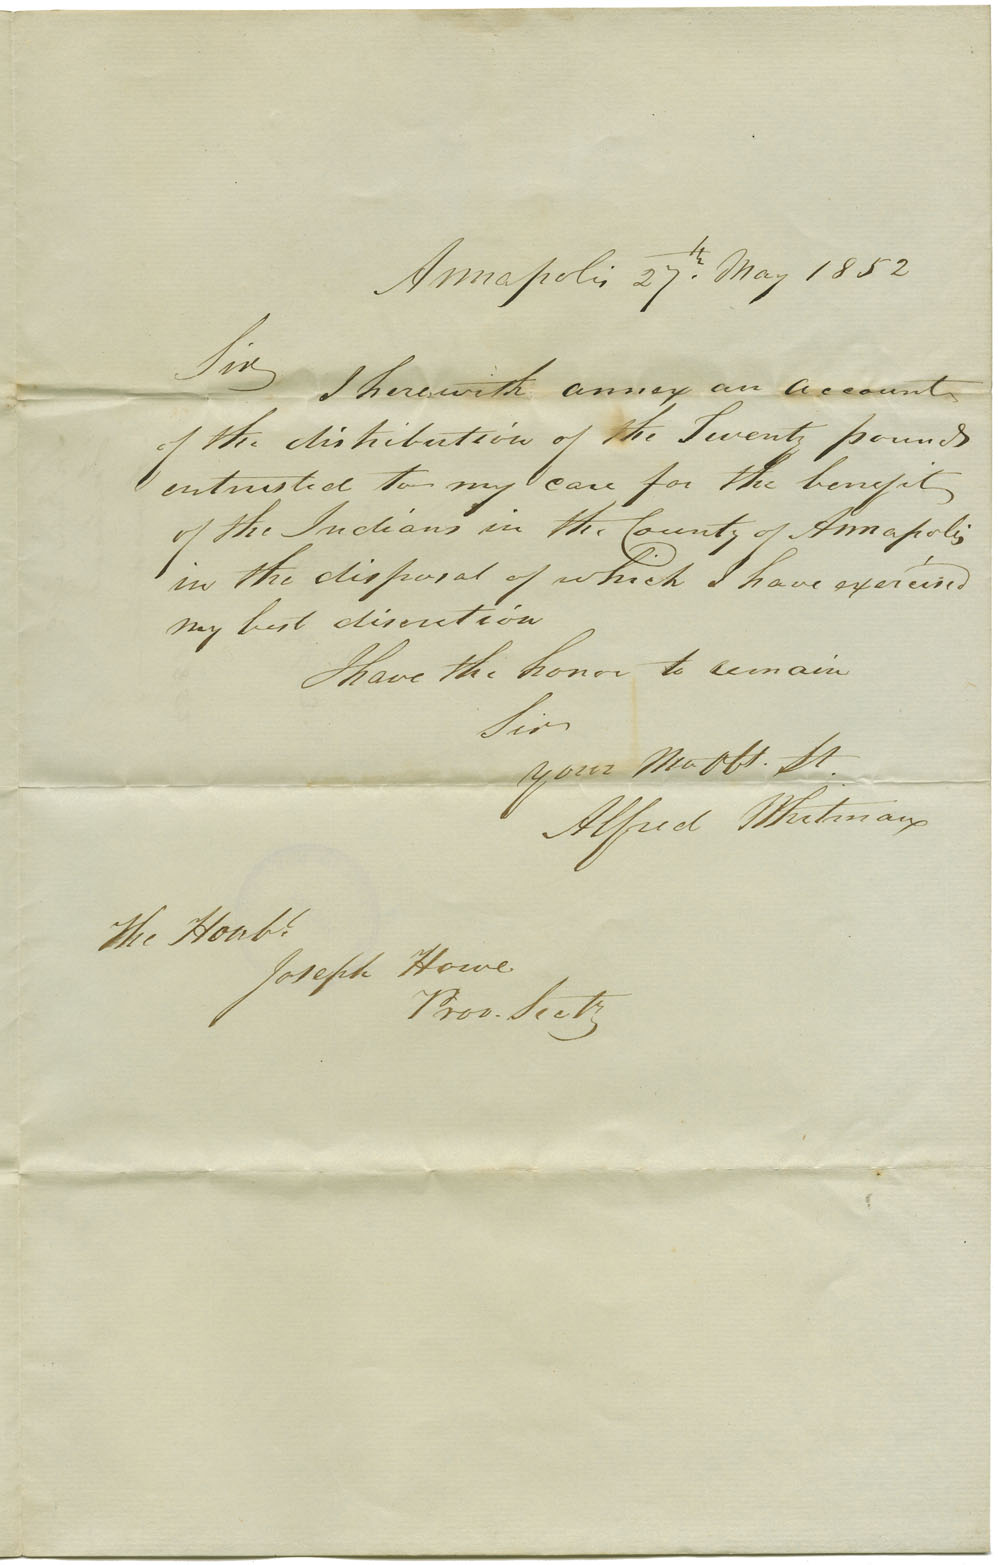 Account of the distribution of £20-0-0 by the Legislature in aid of Mi'kmaq of Annapolis.